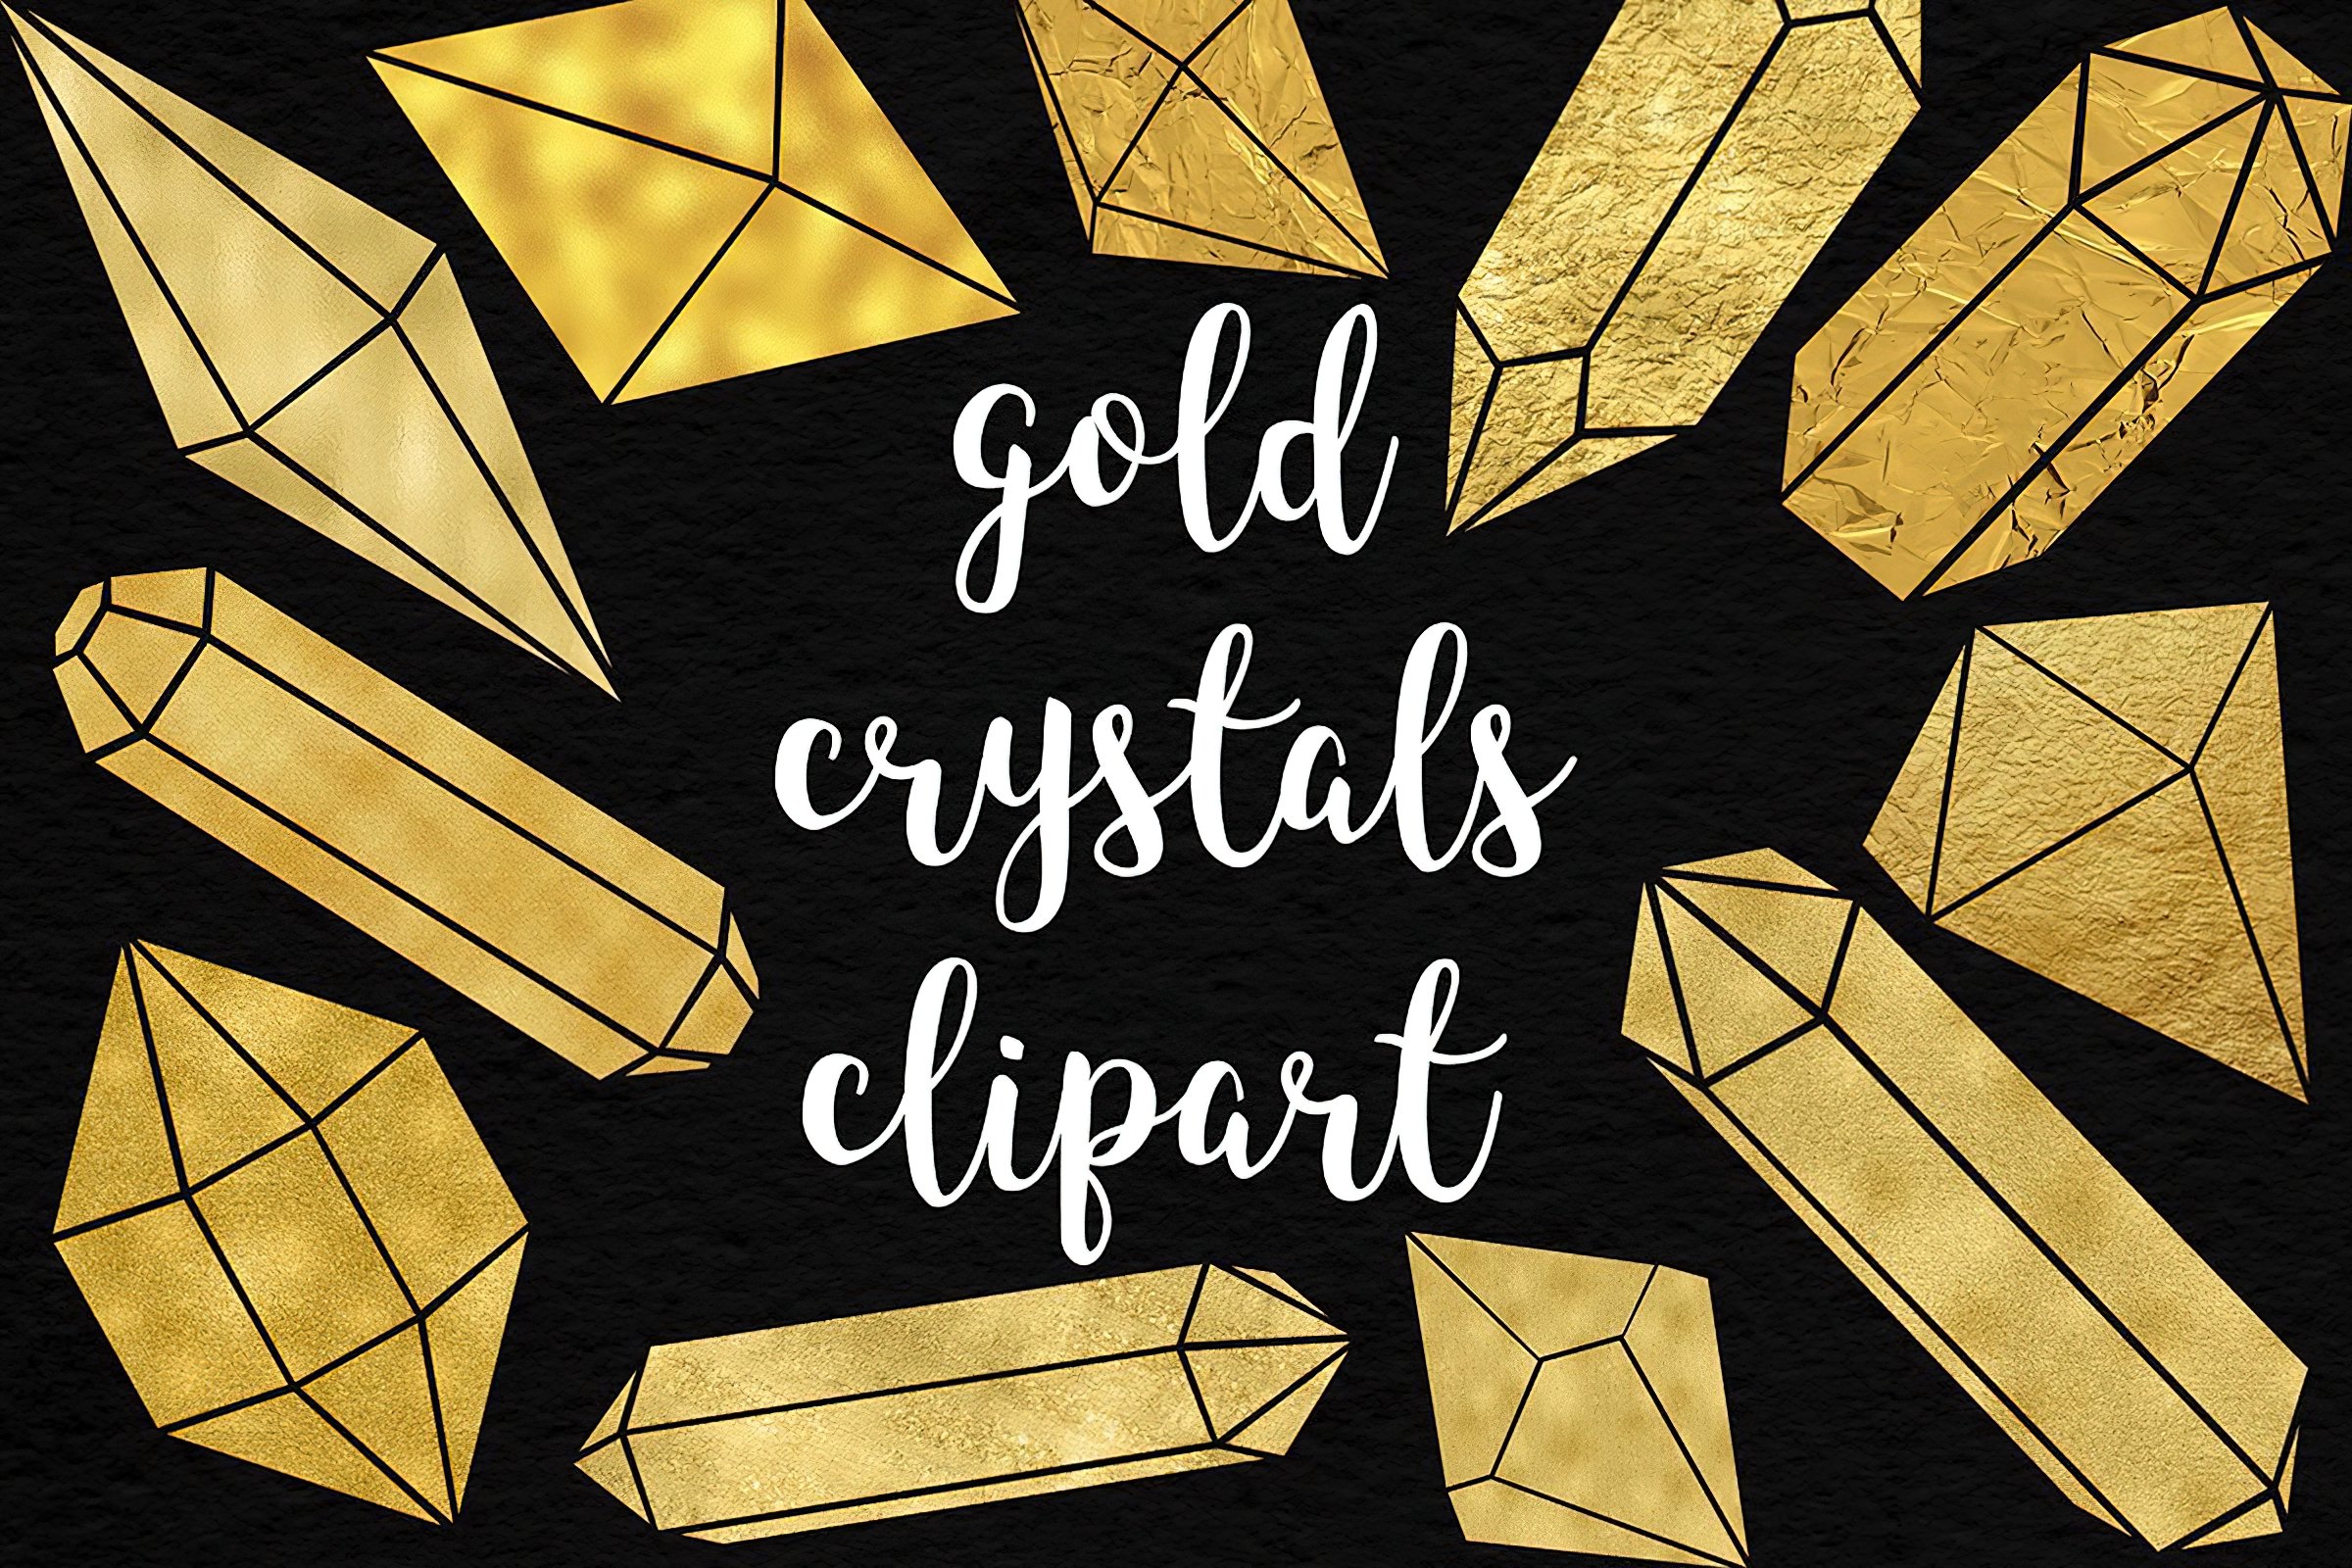 Shimmer Gold Crystals Clipart cover image.